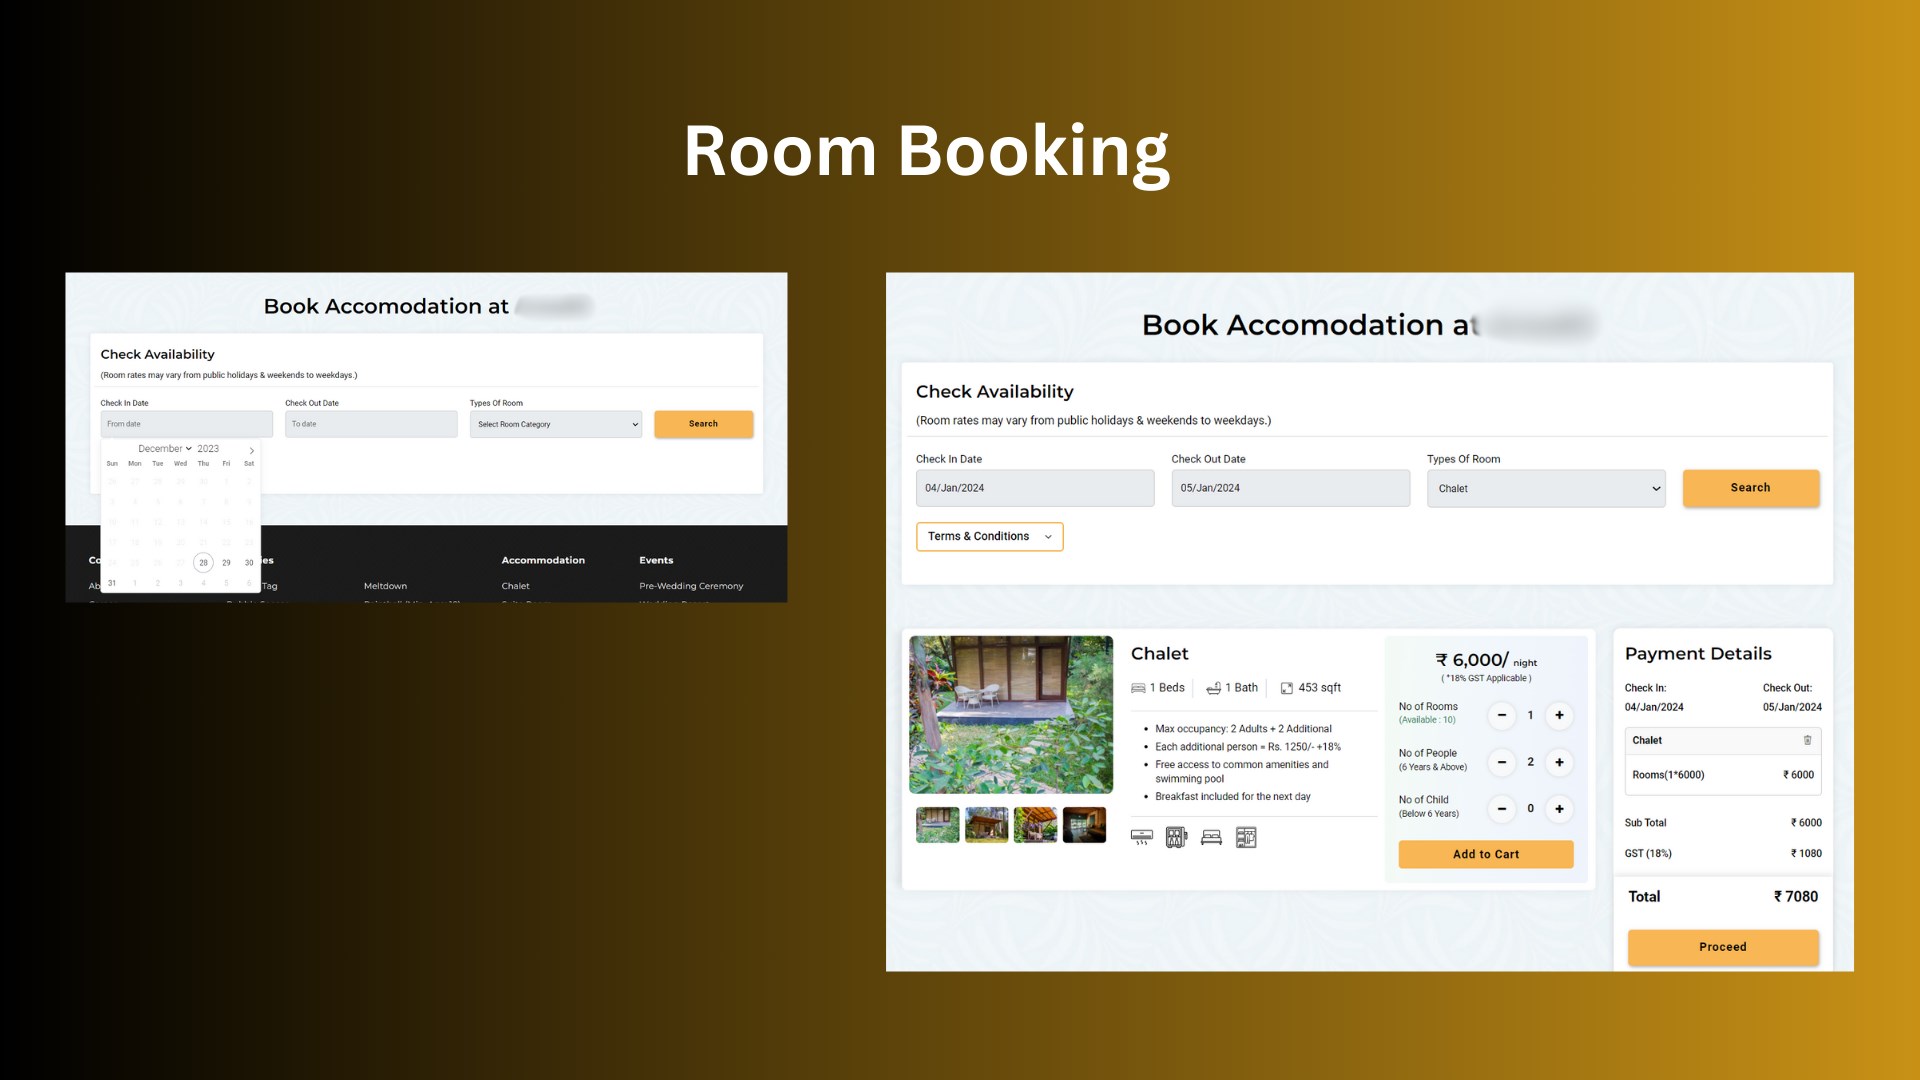 Room booking feature that displays available rooms for selected dates, along with a room gallery updated from the backend.